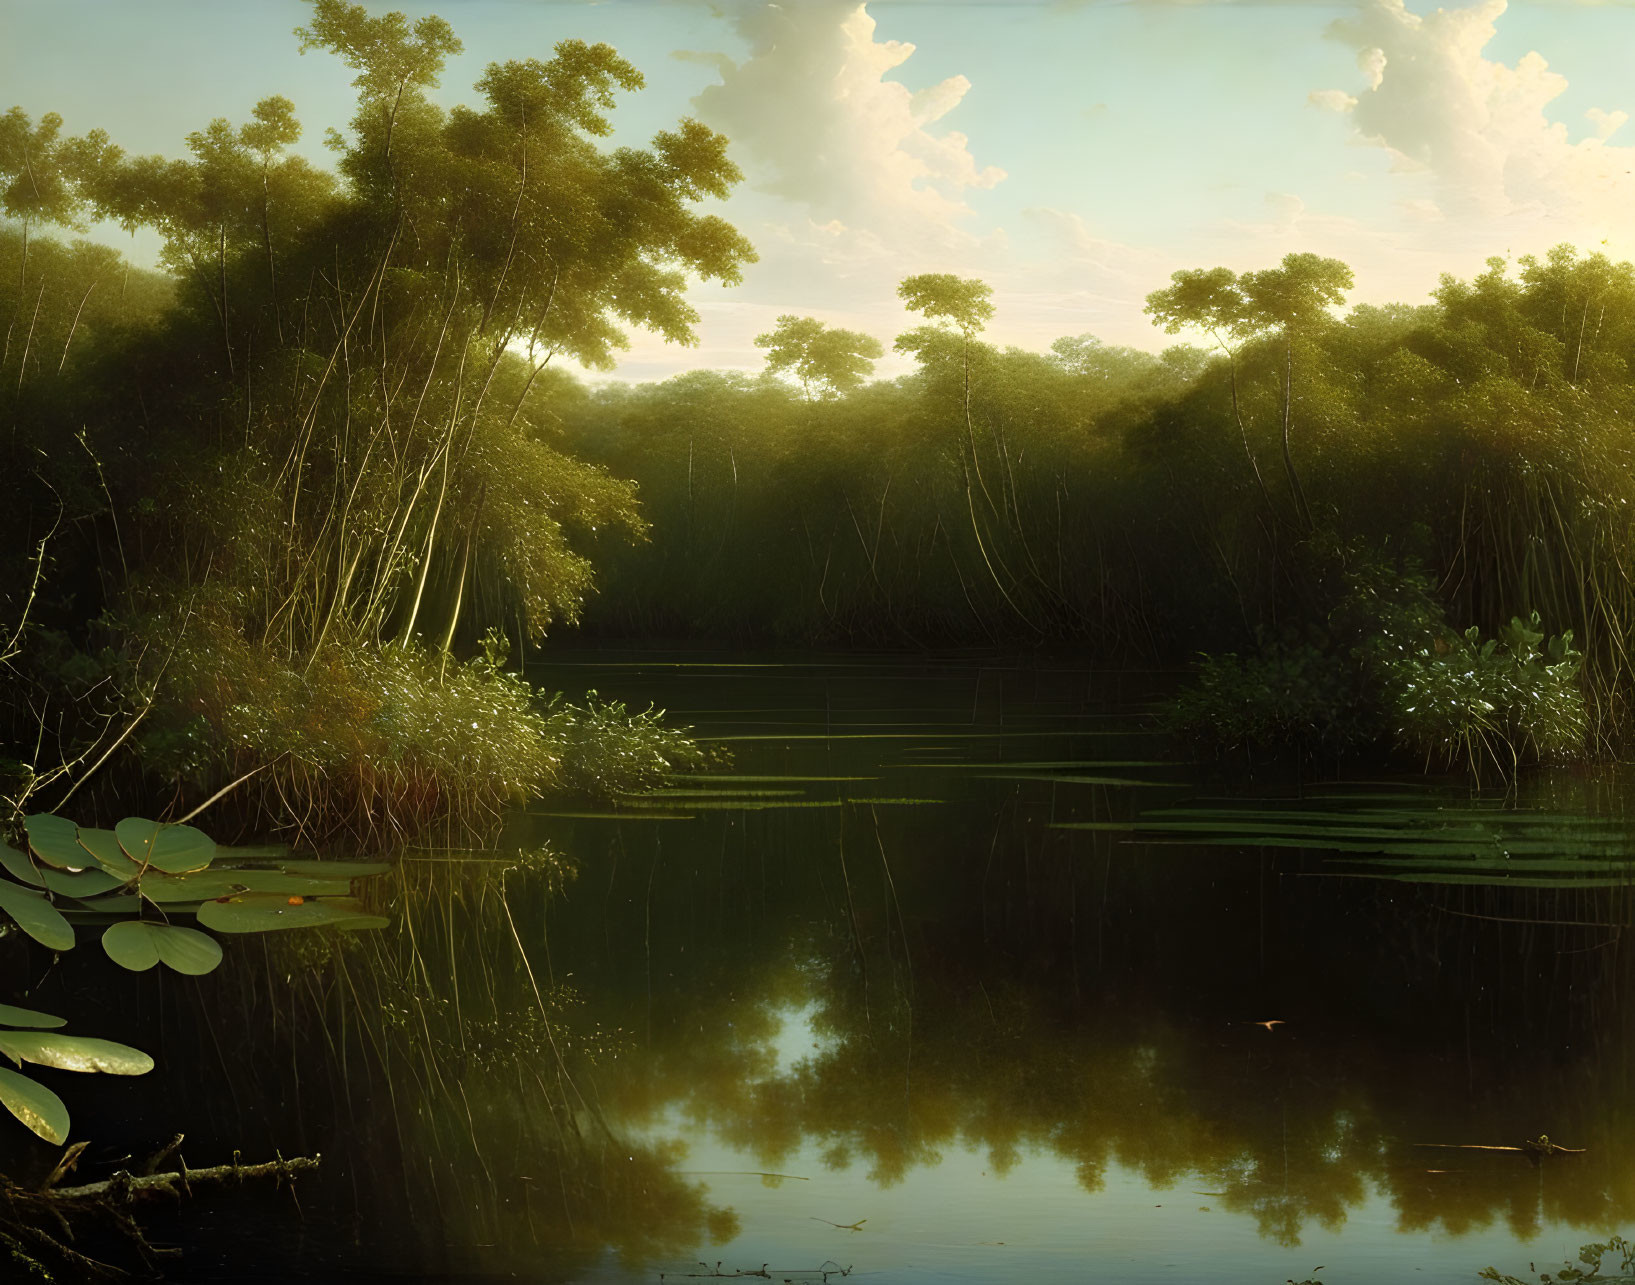 Tranquil lakeside scene with lush vegetation and bamboo mirrored in calm water at sunset